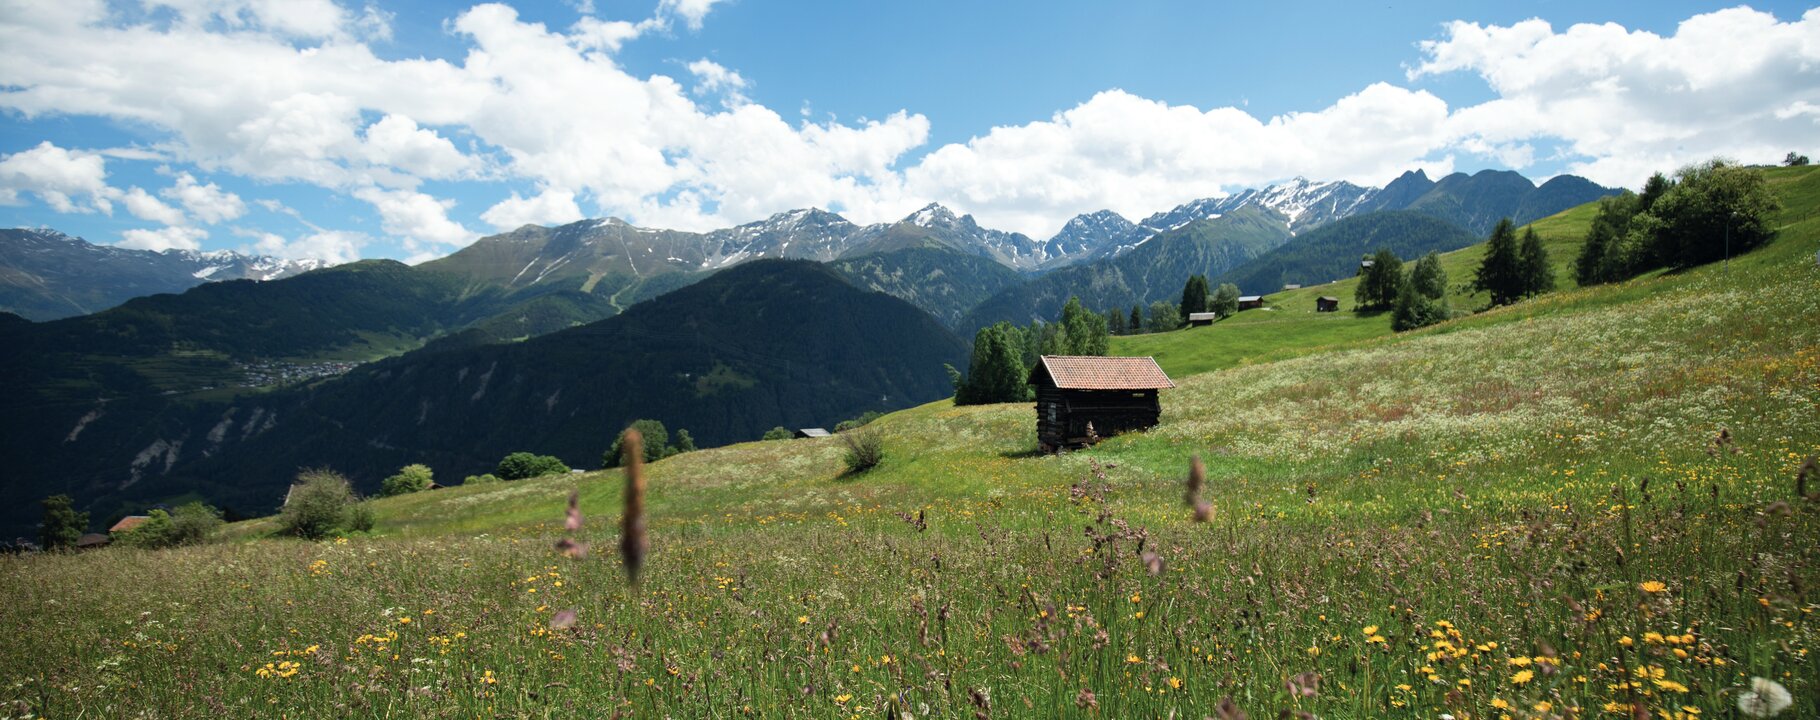 summer holiday in the beautiful landscape of Serfaus-Fiss-Ladis | © Andreas Kirschner